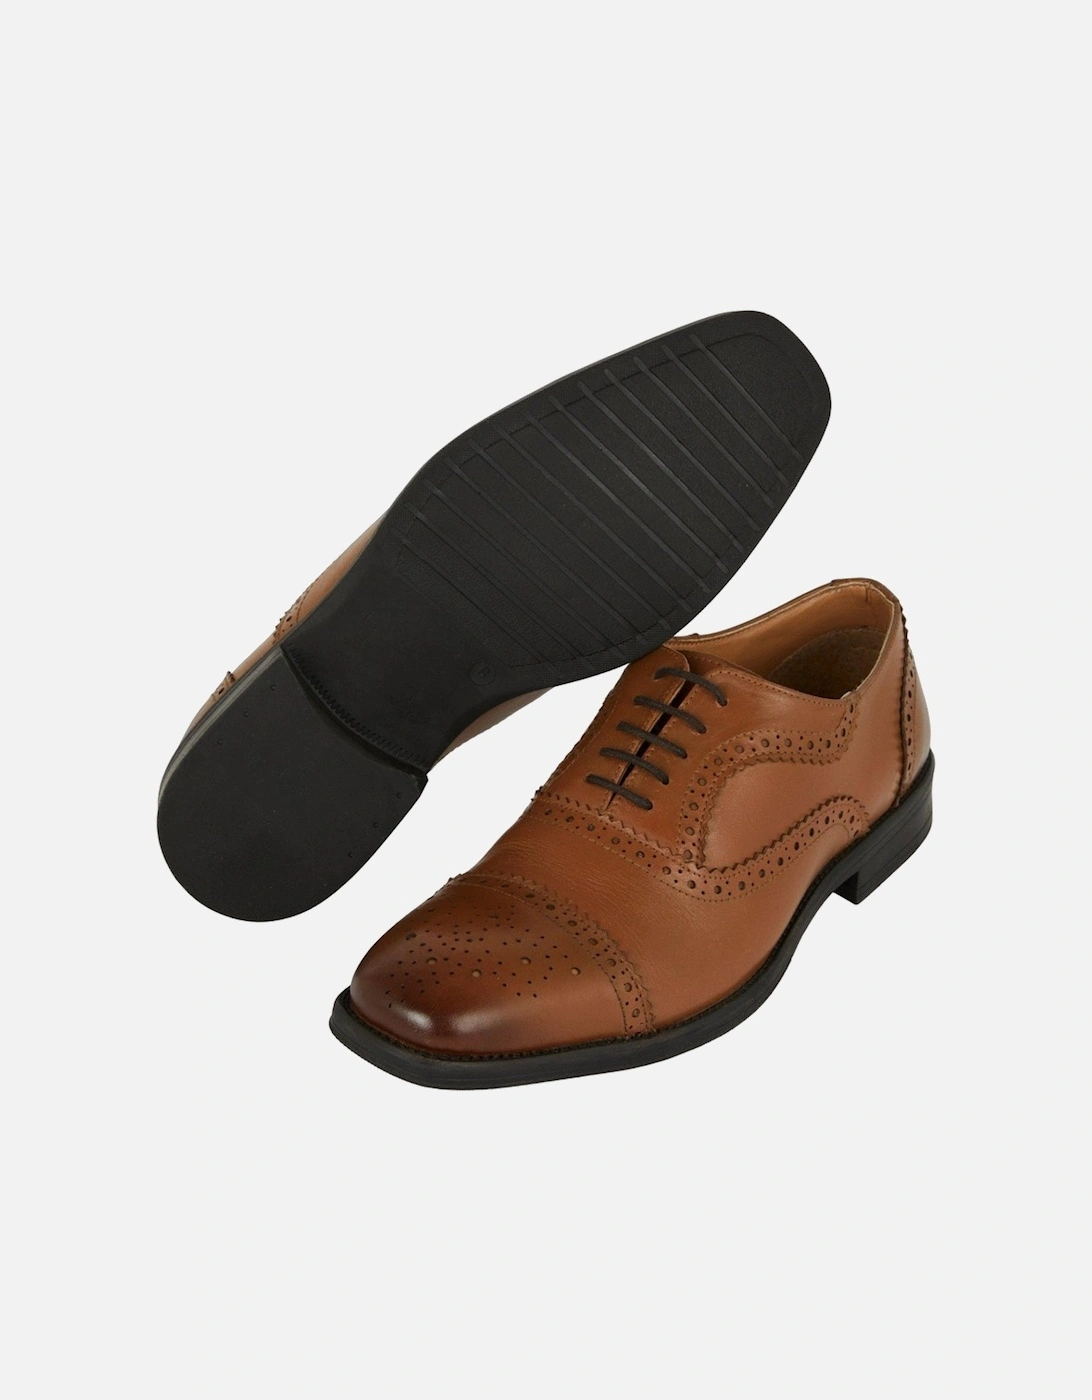 Mens Thomas Blunt Leather Brogues